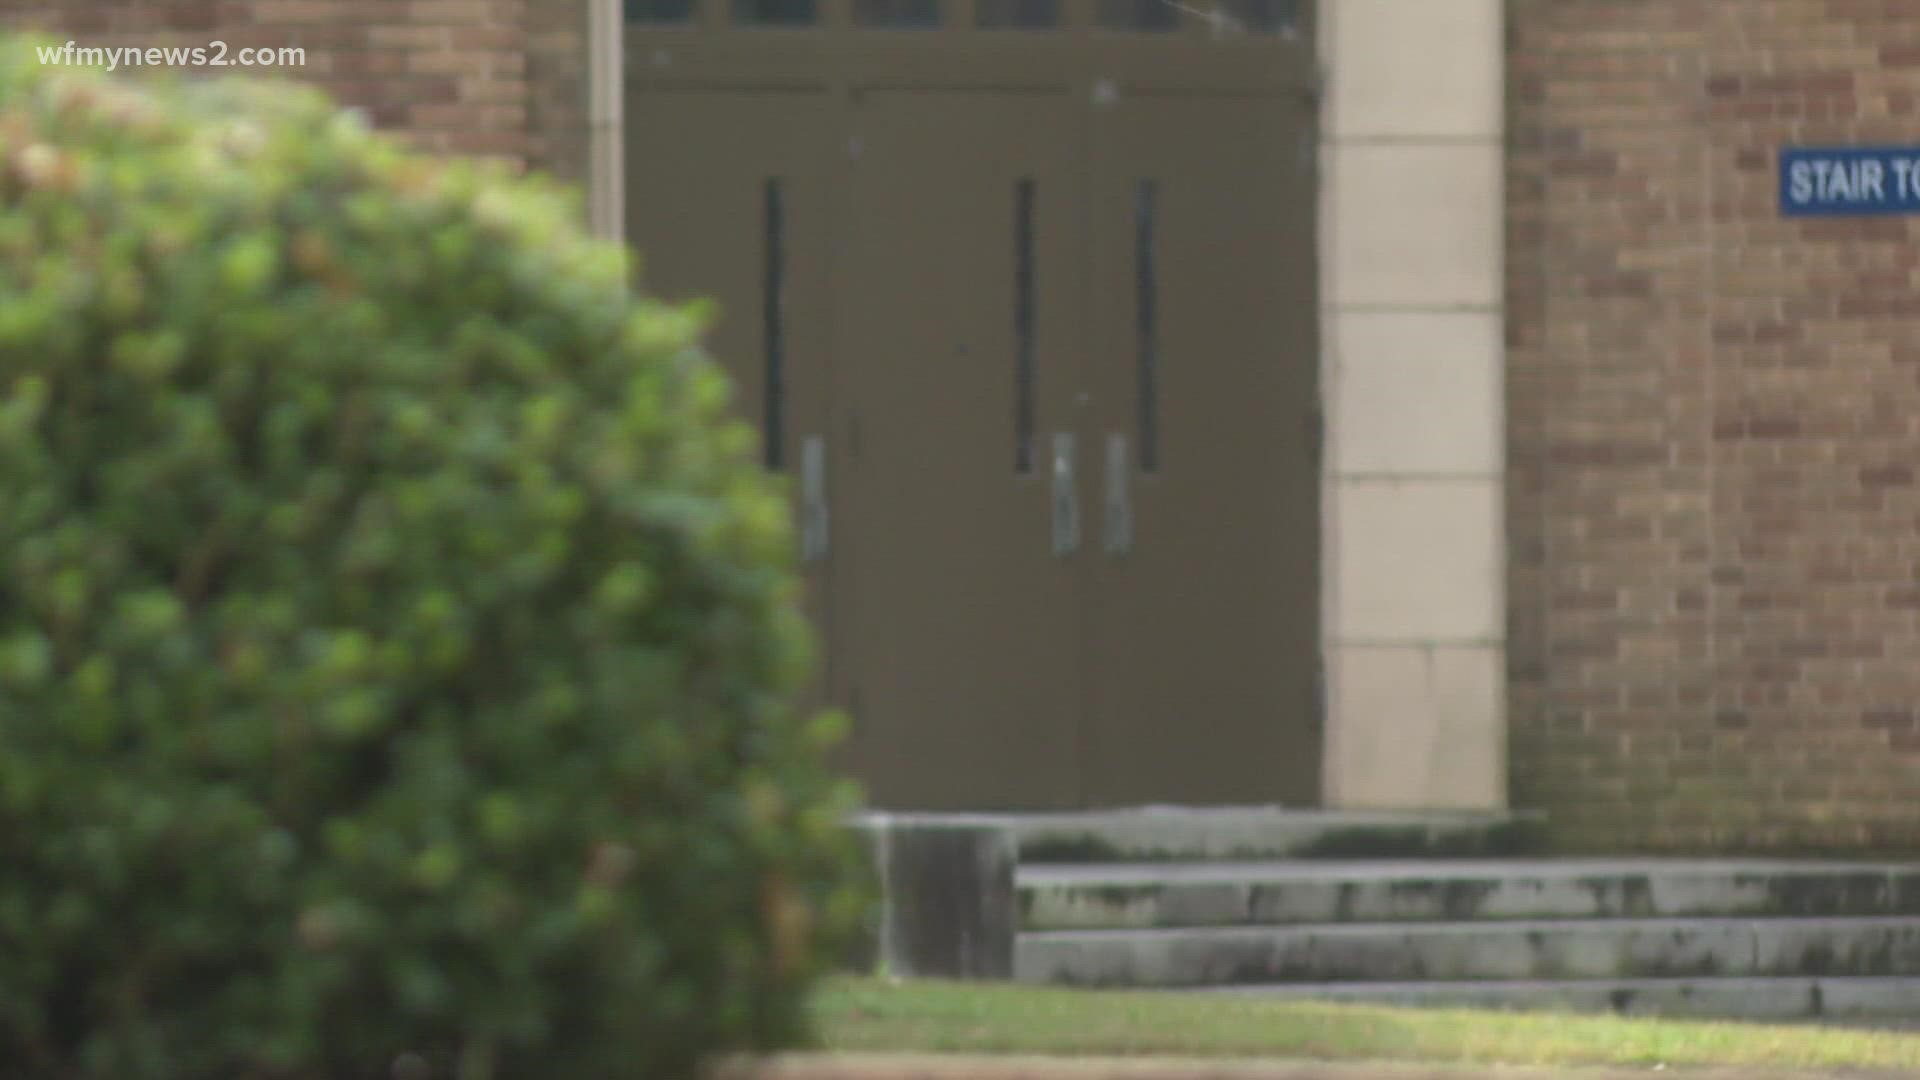 Guilford County School leaders discuss solutions to keeping guns off school campuses.